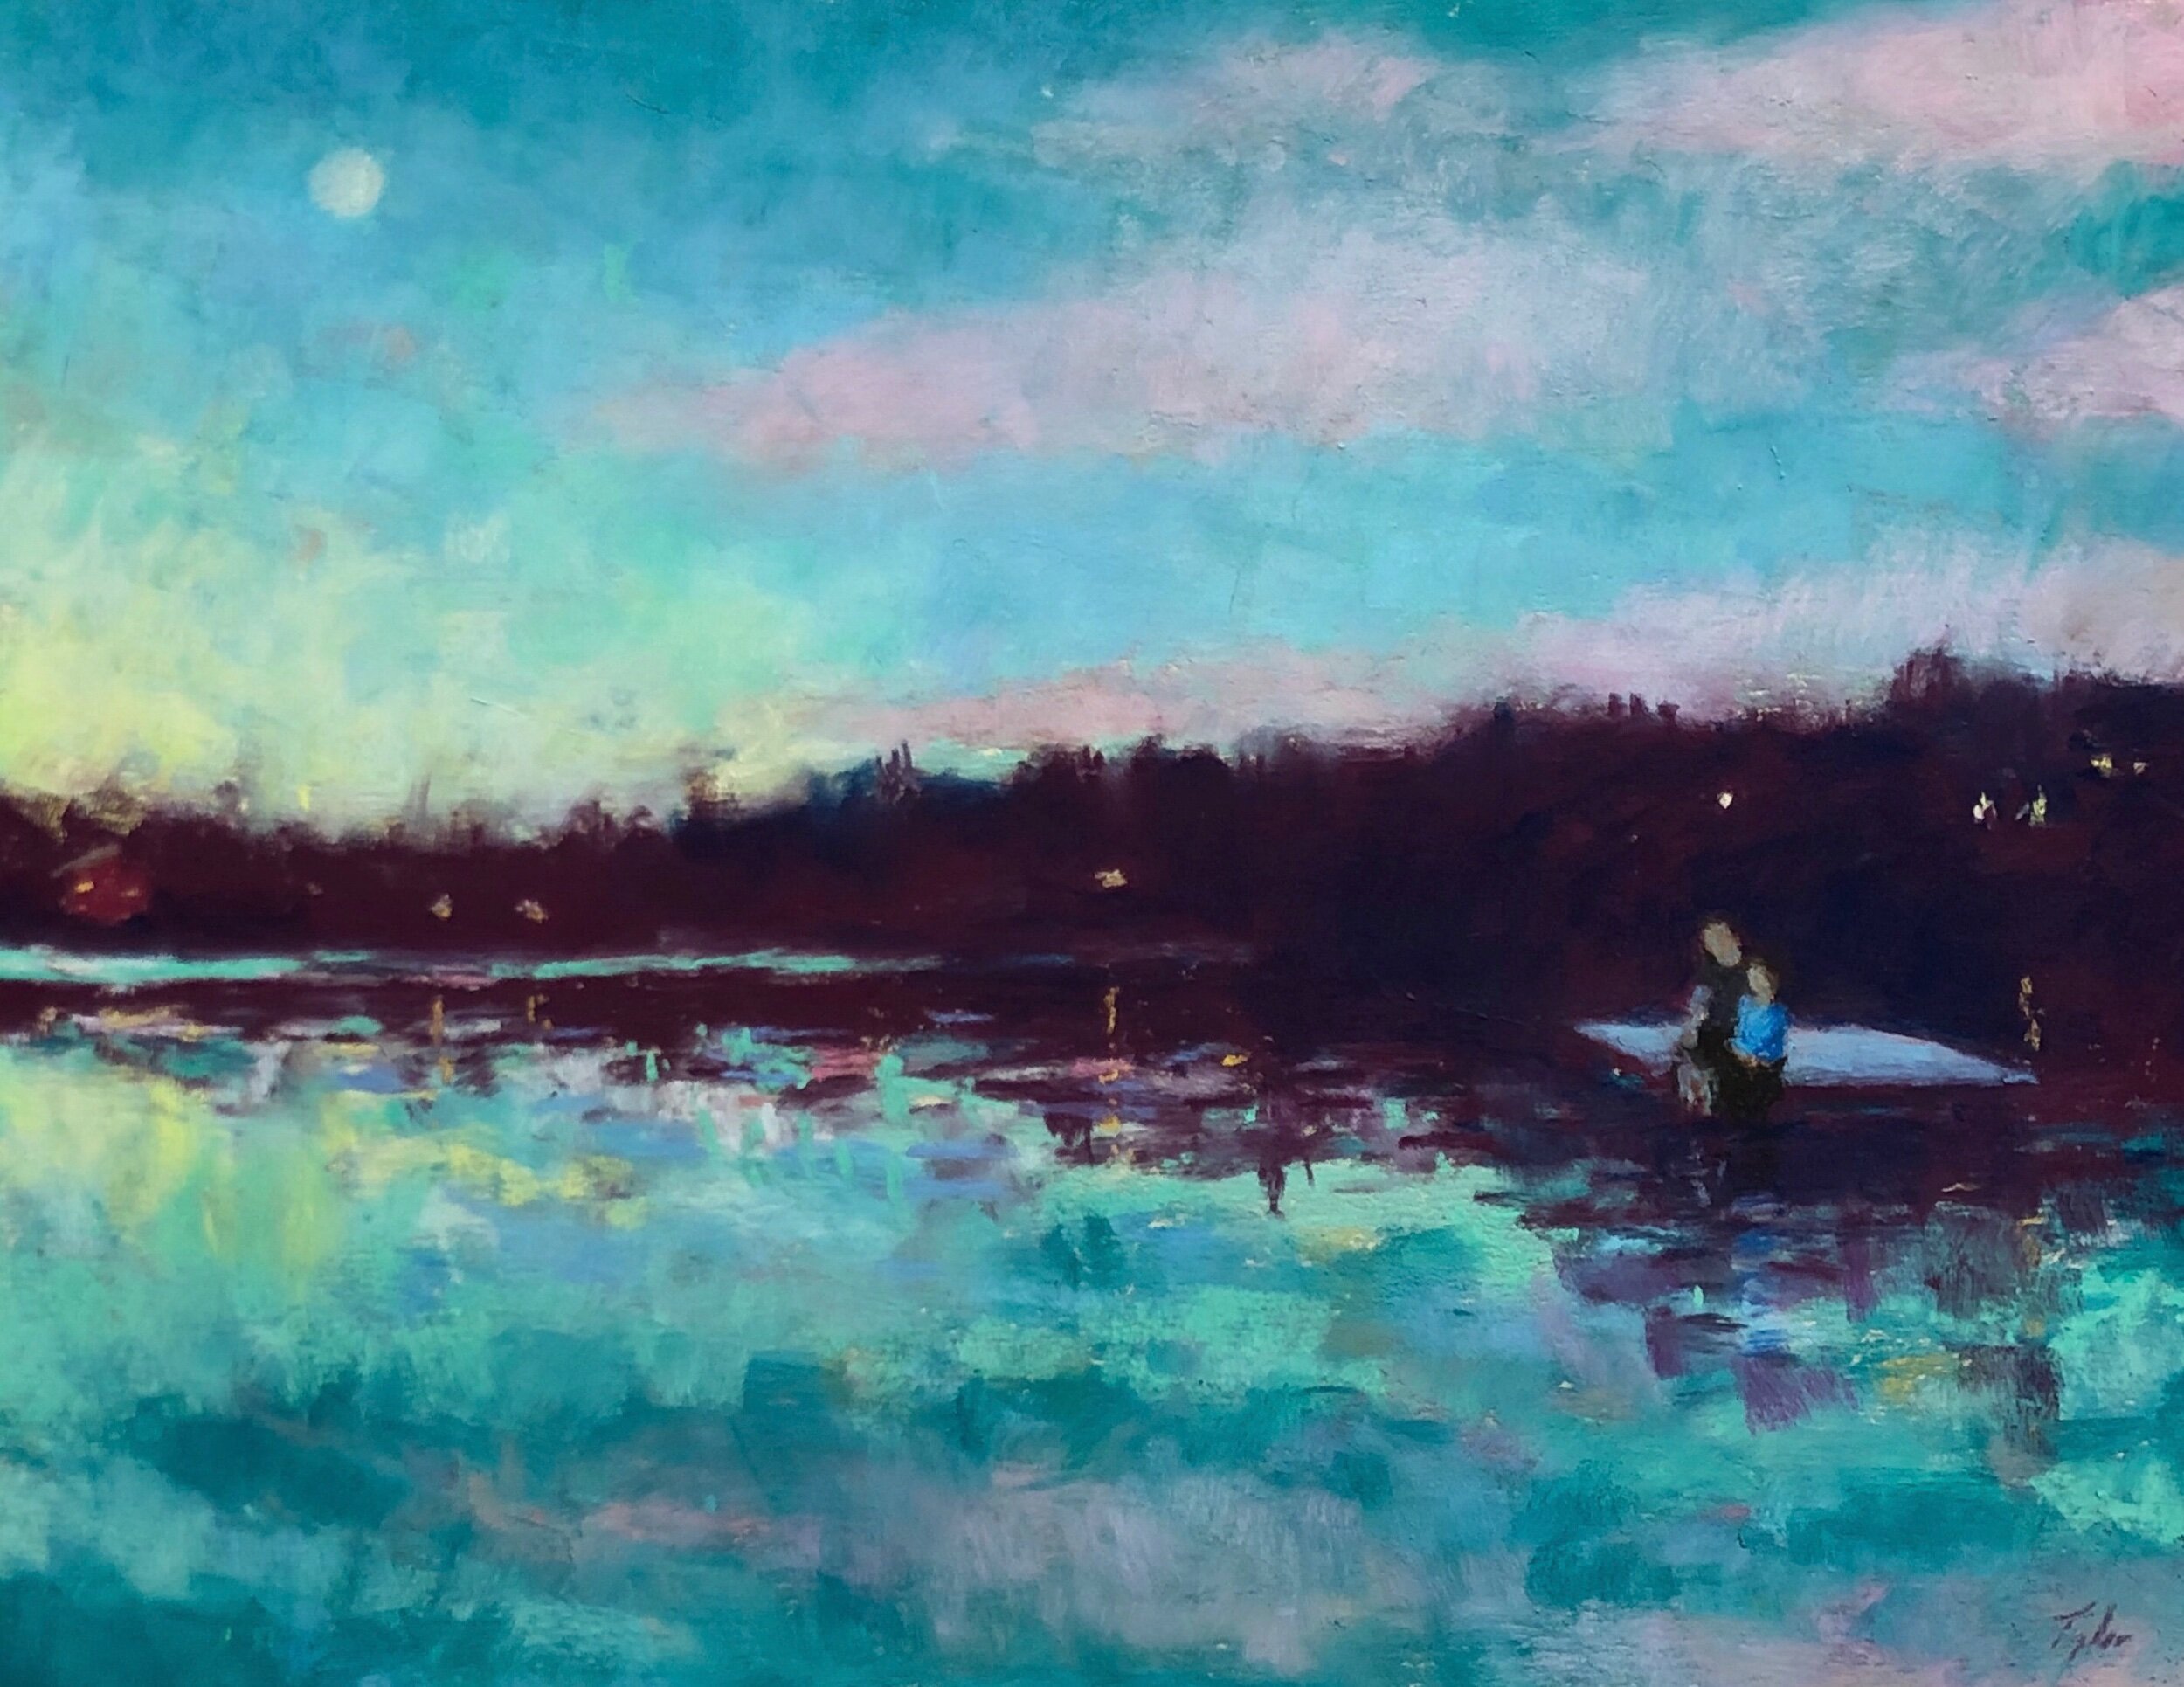  “On Tucker Pond”    pastel on sanded paper    8.5” x 11”    private collection 